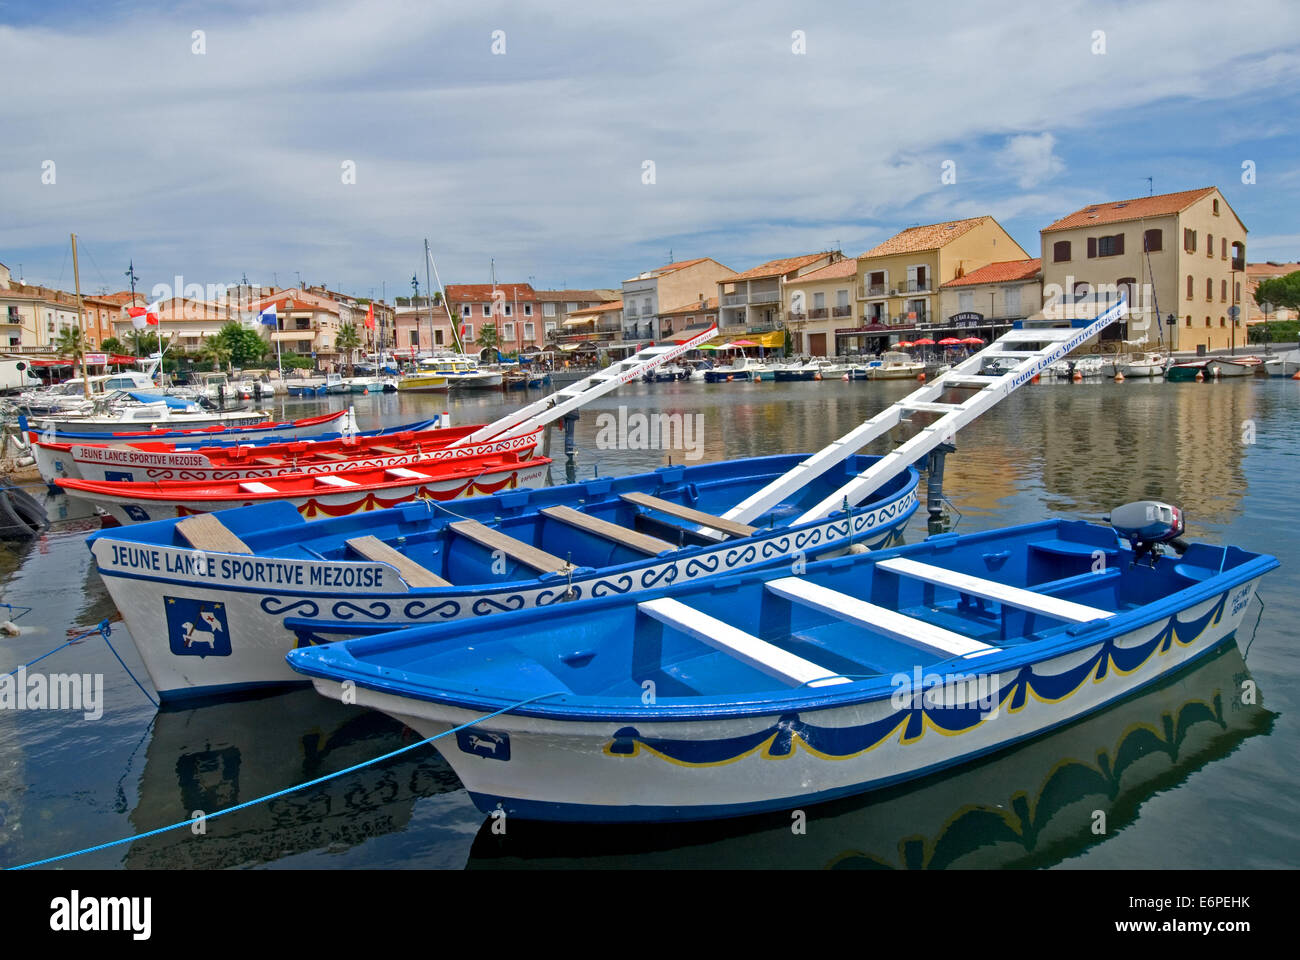 Meze harbour in the South of France, with unique joust boats moored to the quayside. Joust is a boat based sport unique to the Bassin de Thau towns. Stock Photo